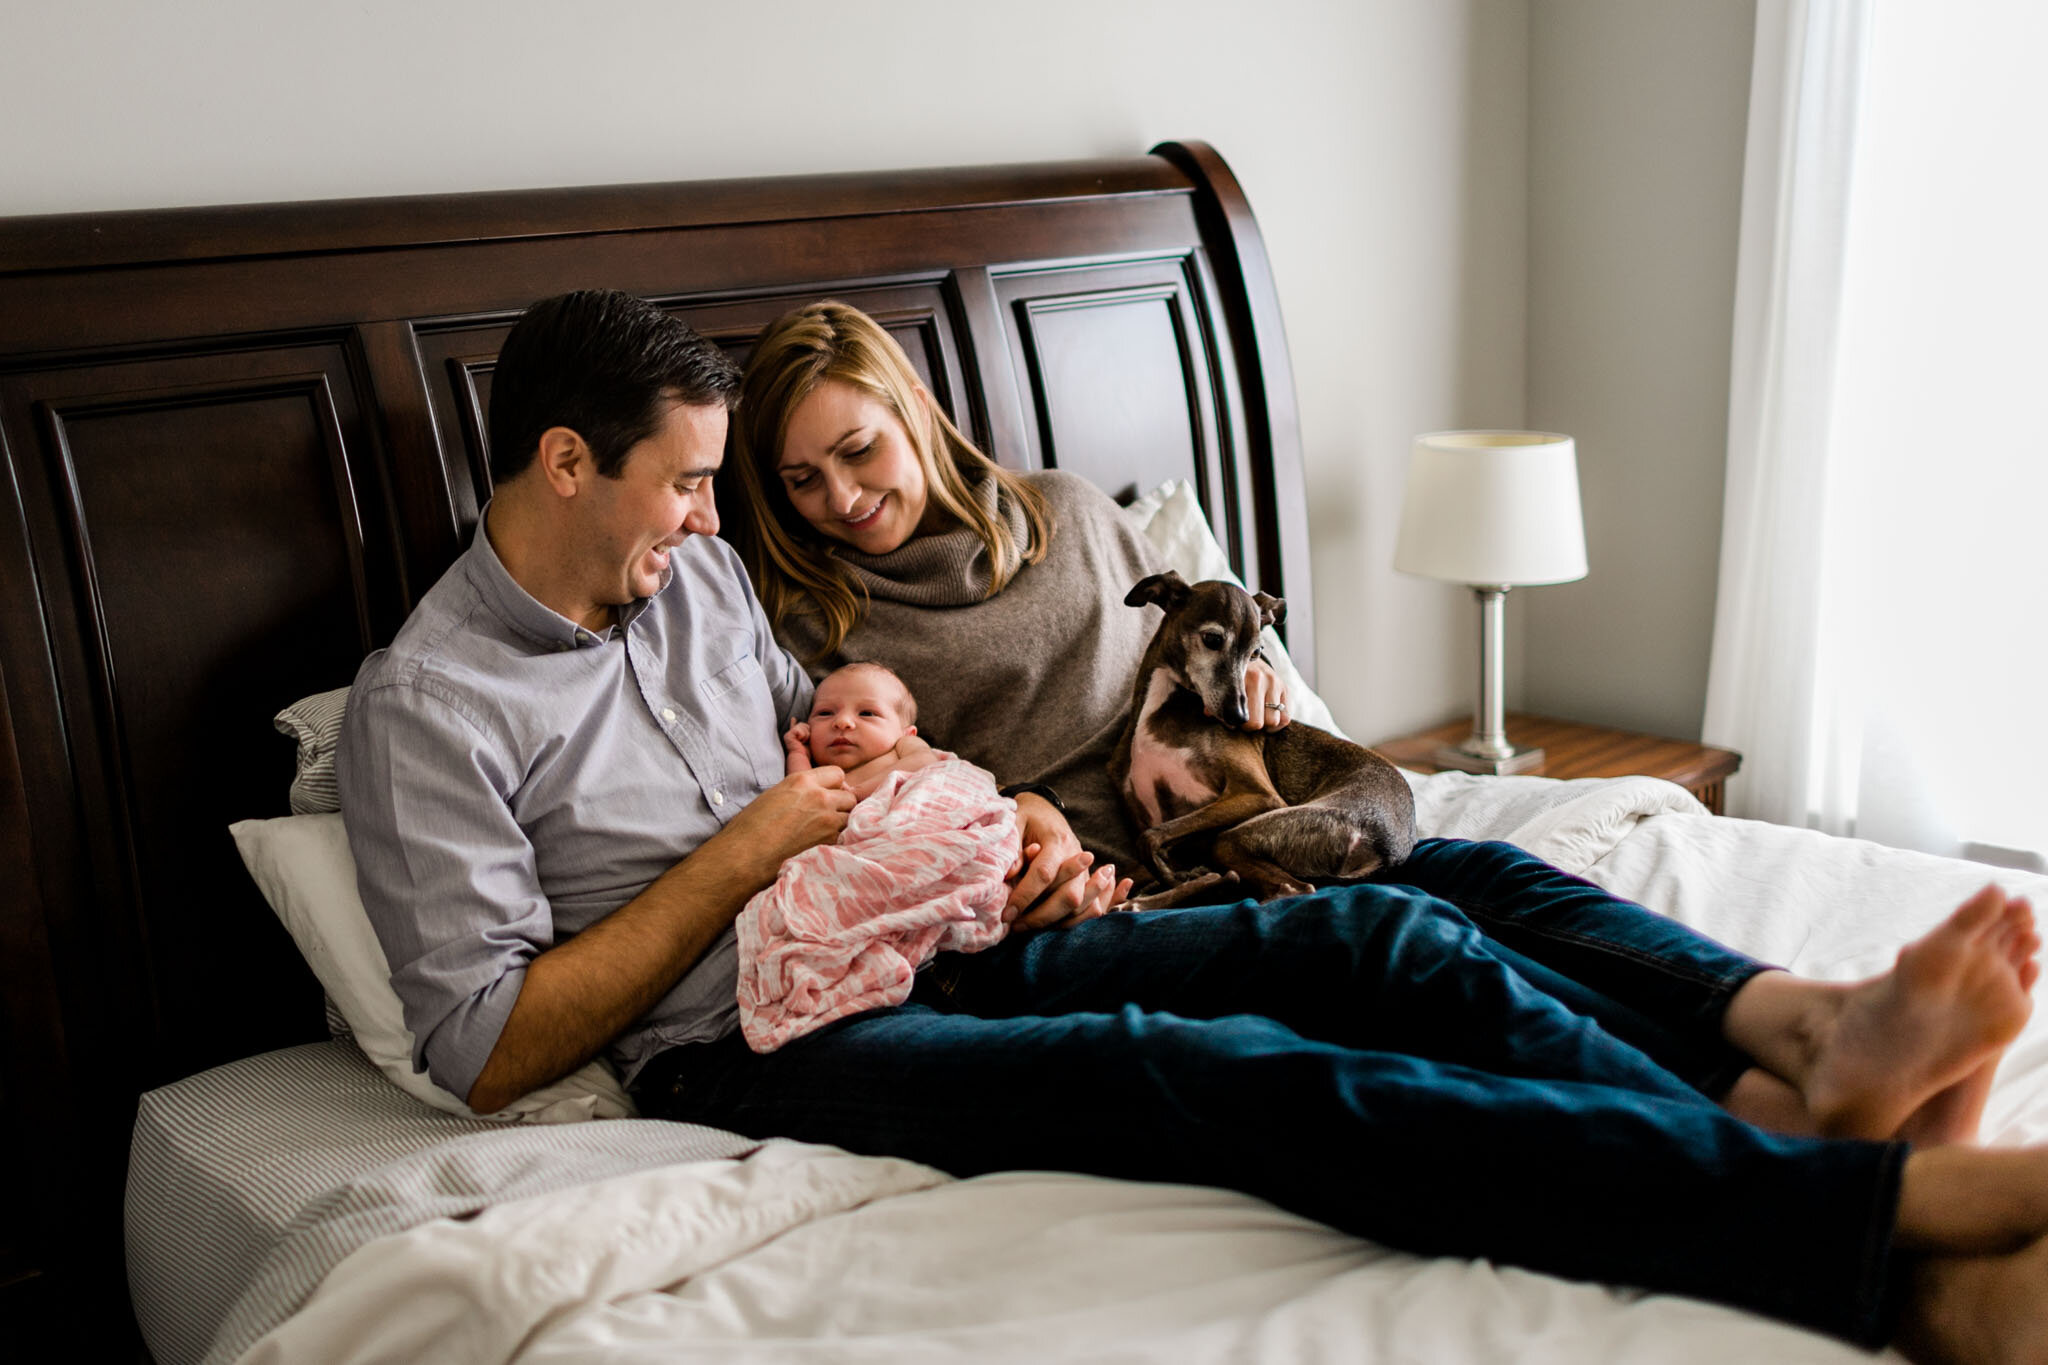 Beautiful organic lifestyle session at home | Lifestyle Newborn Photography | By G. Lin Photography | Raleigh Baby Photographer